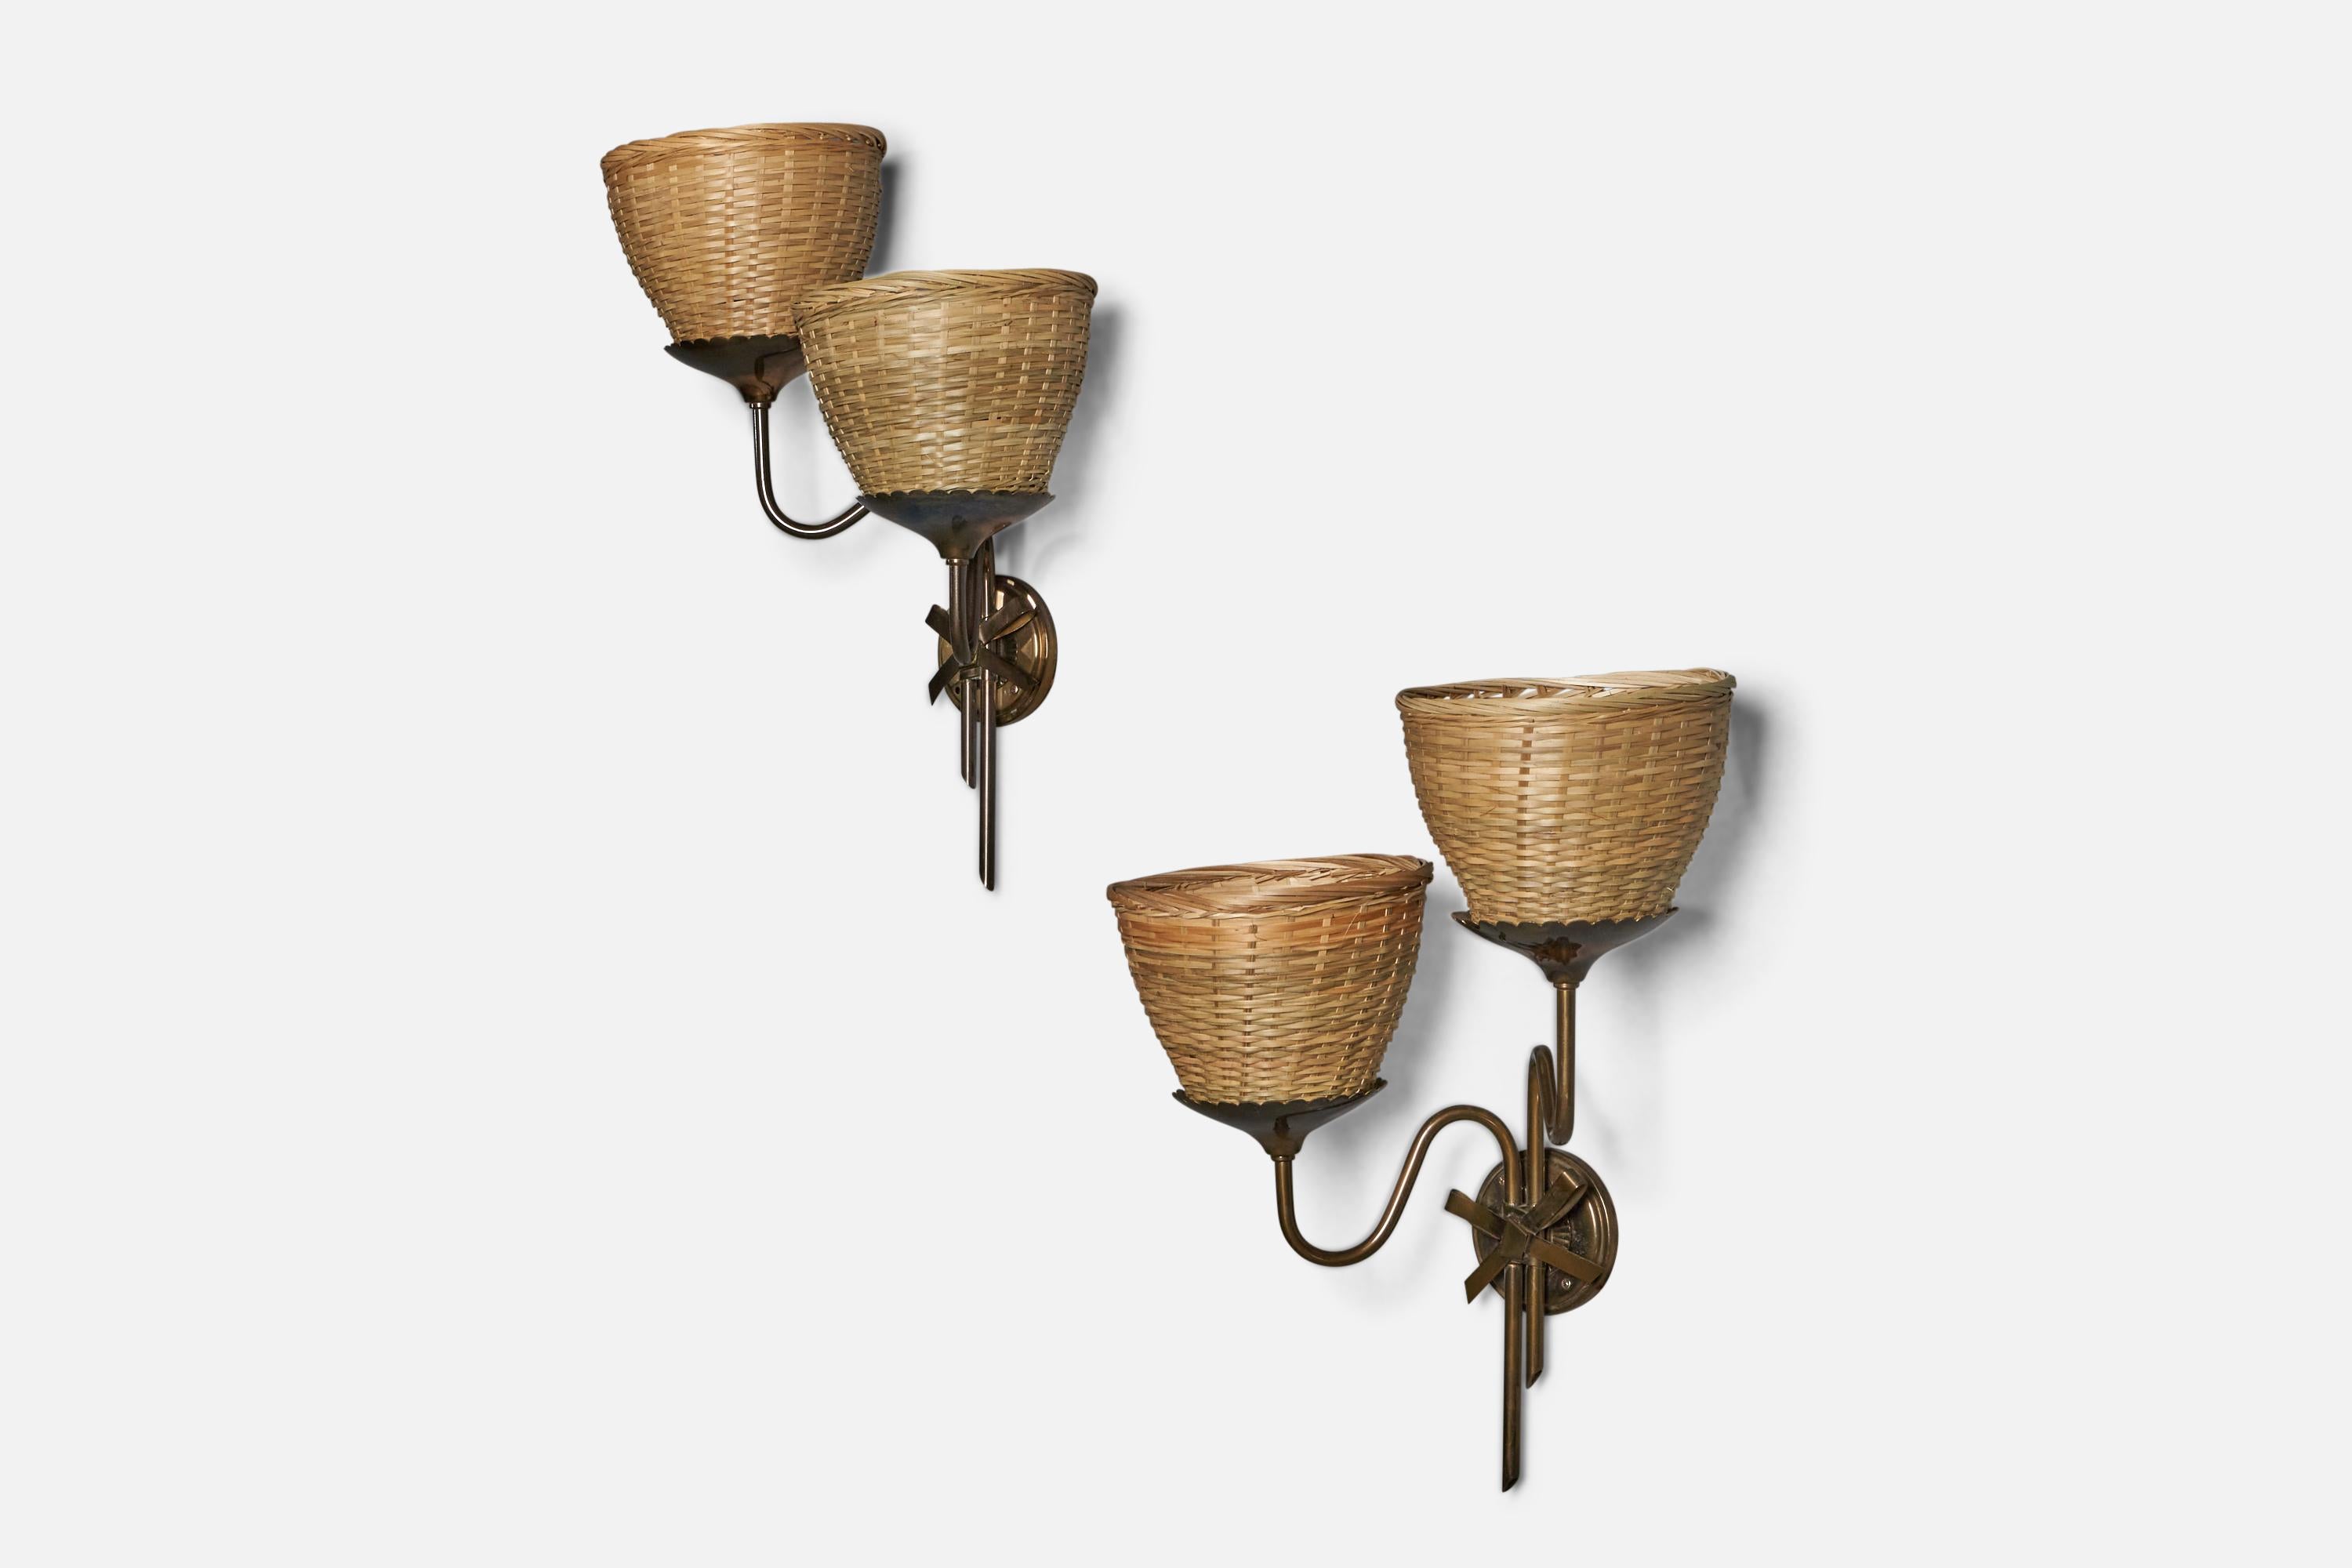 A pair of two-armed organic brass and rattan wall lights, designed and produced in Sweden, c. 1940s.

Overall Dimensions (inches): 19” H x 15” W x 9” D
Back Plate Dimensions (inches): 3.75” Diameter x 0.5” D
Bulb Specifications: E-26 Bulb
Number of